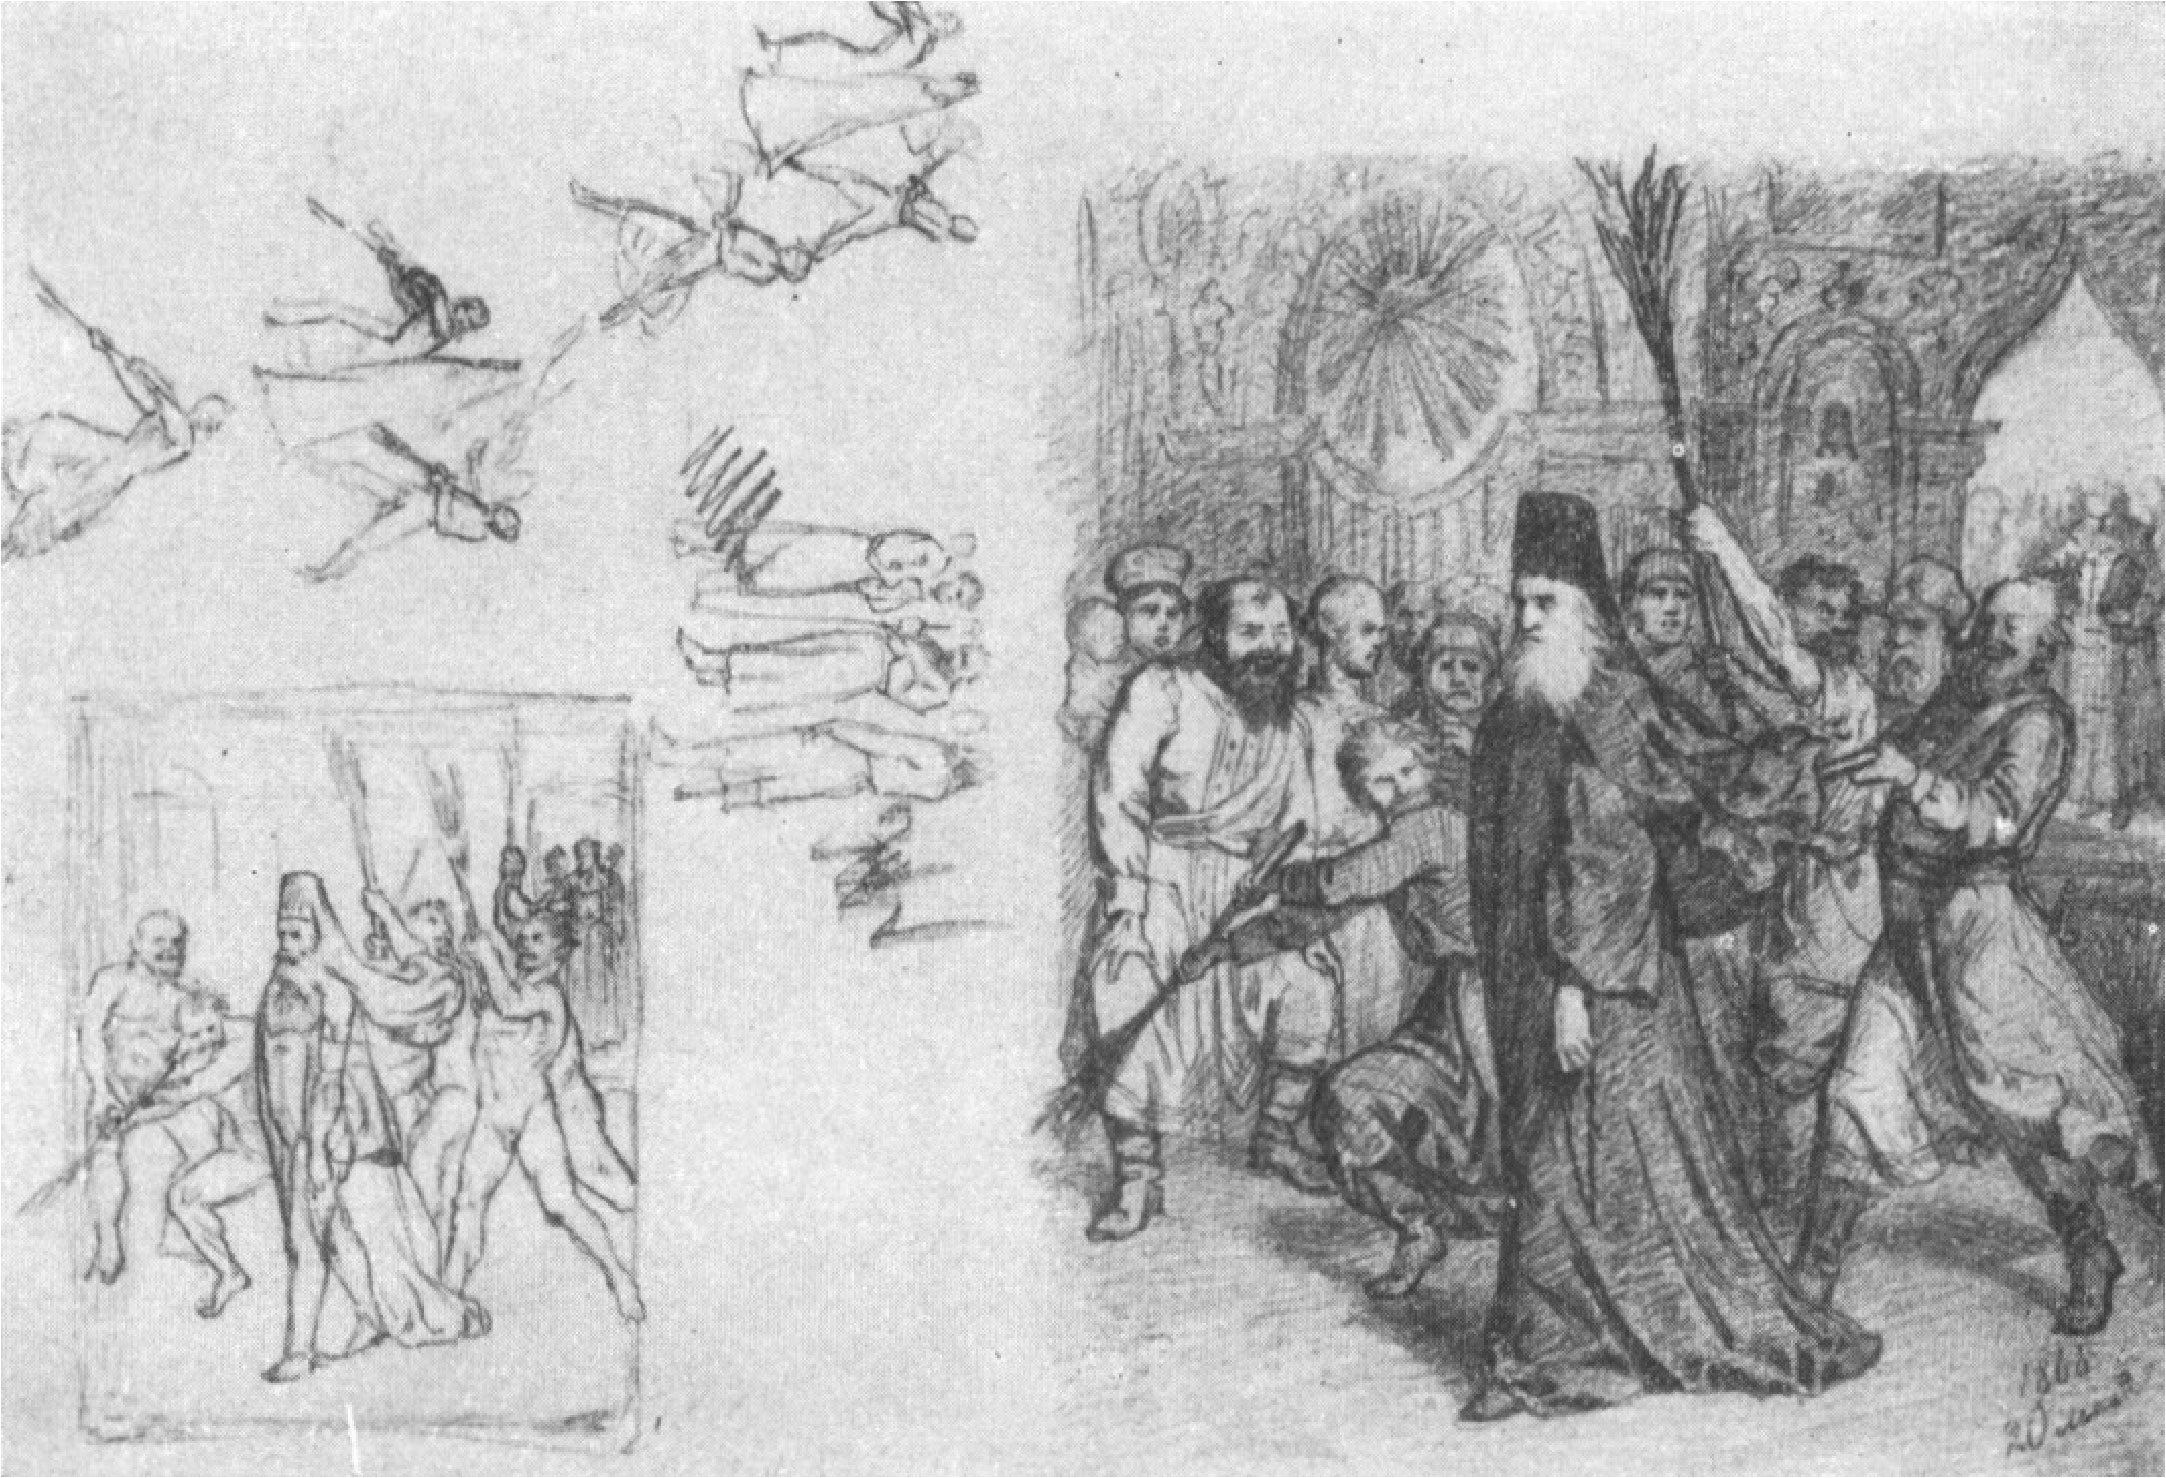 Mitropolit Philip II Being Expelled from the Church by Ivan the Terrible on 8 November 1568